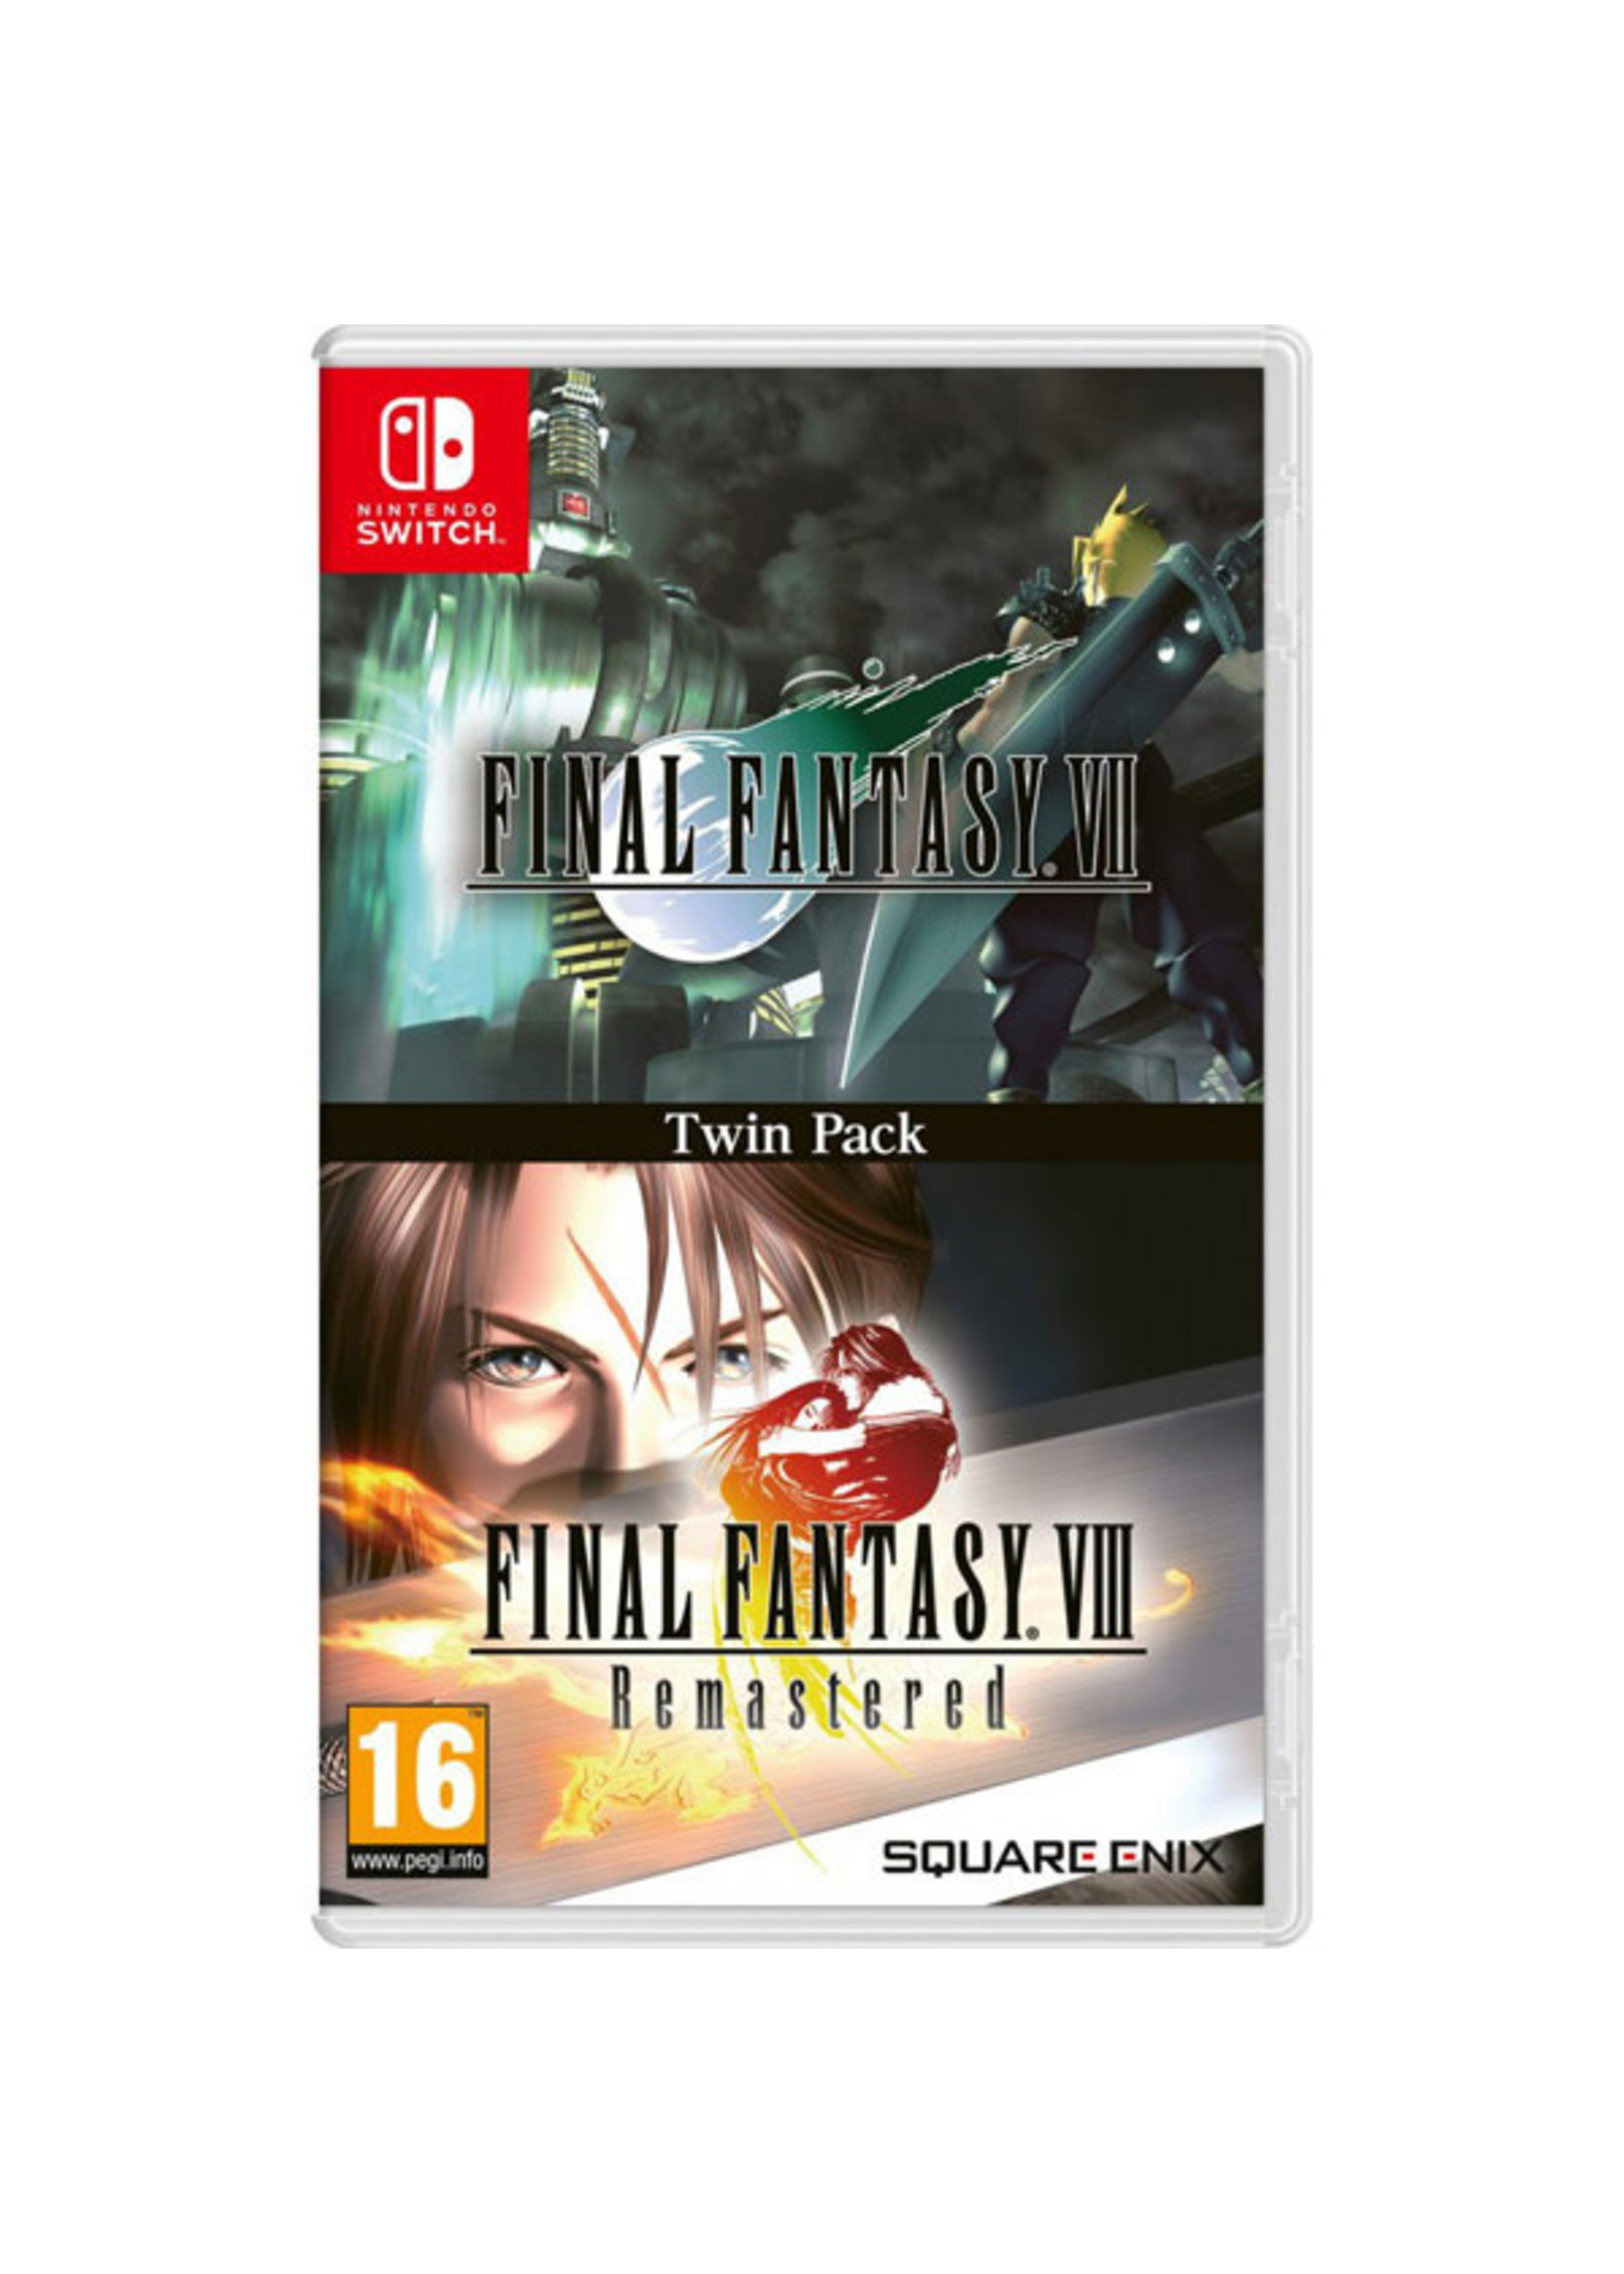 FINAL FANTASY 7 AND 8 REMASTERED TWIN PACK (EU IMPORT) SWITCH